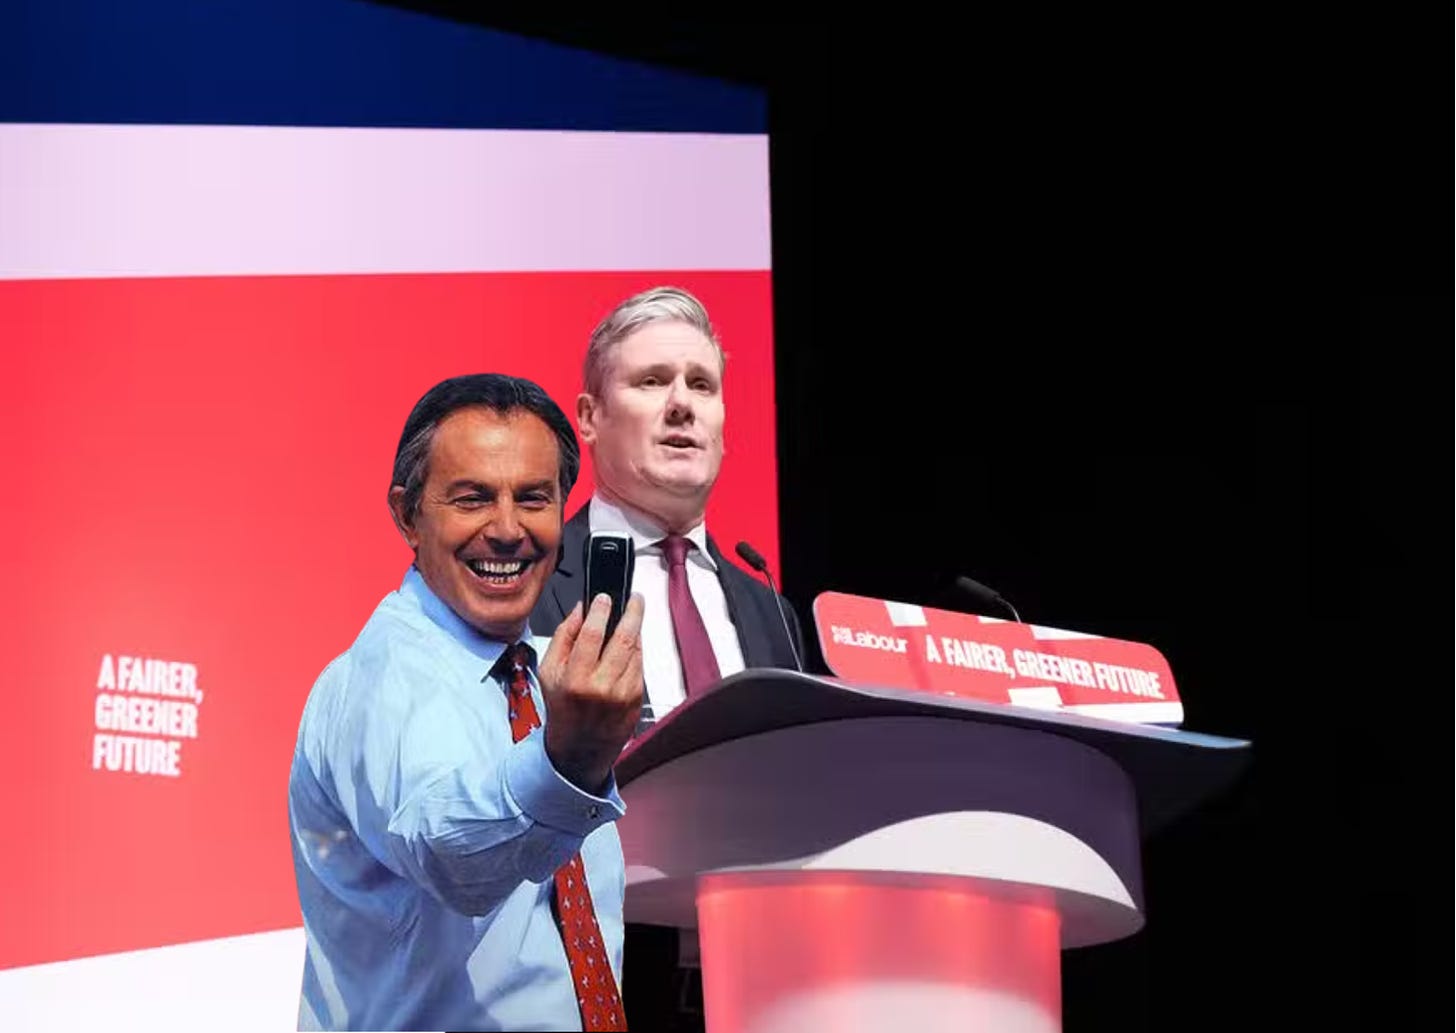 A time travelling Tony Blair snaps a selfie with Keir Starmer